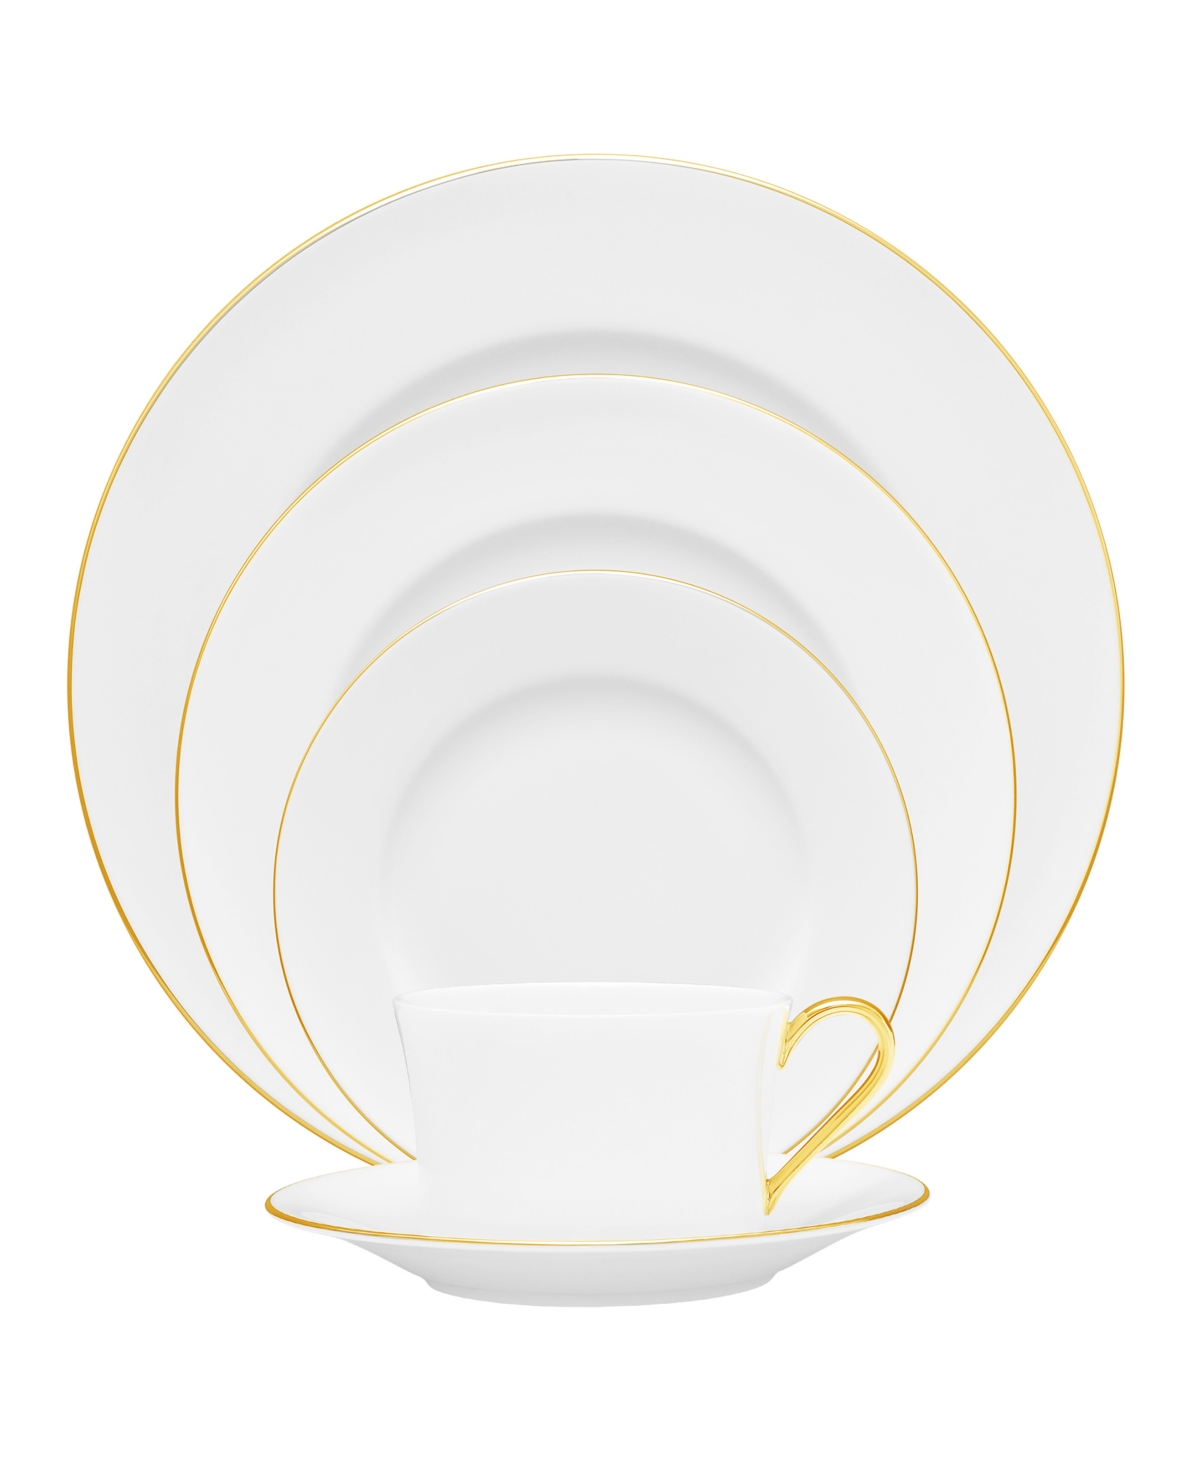 Noritake Accompanist 5 Piece Place Setting In Gold